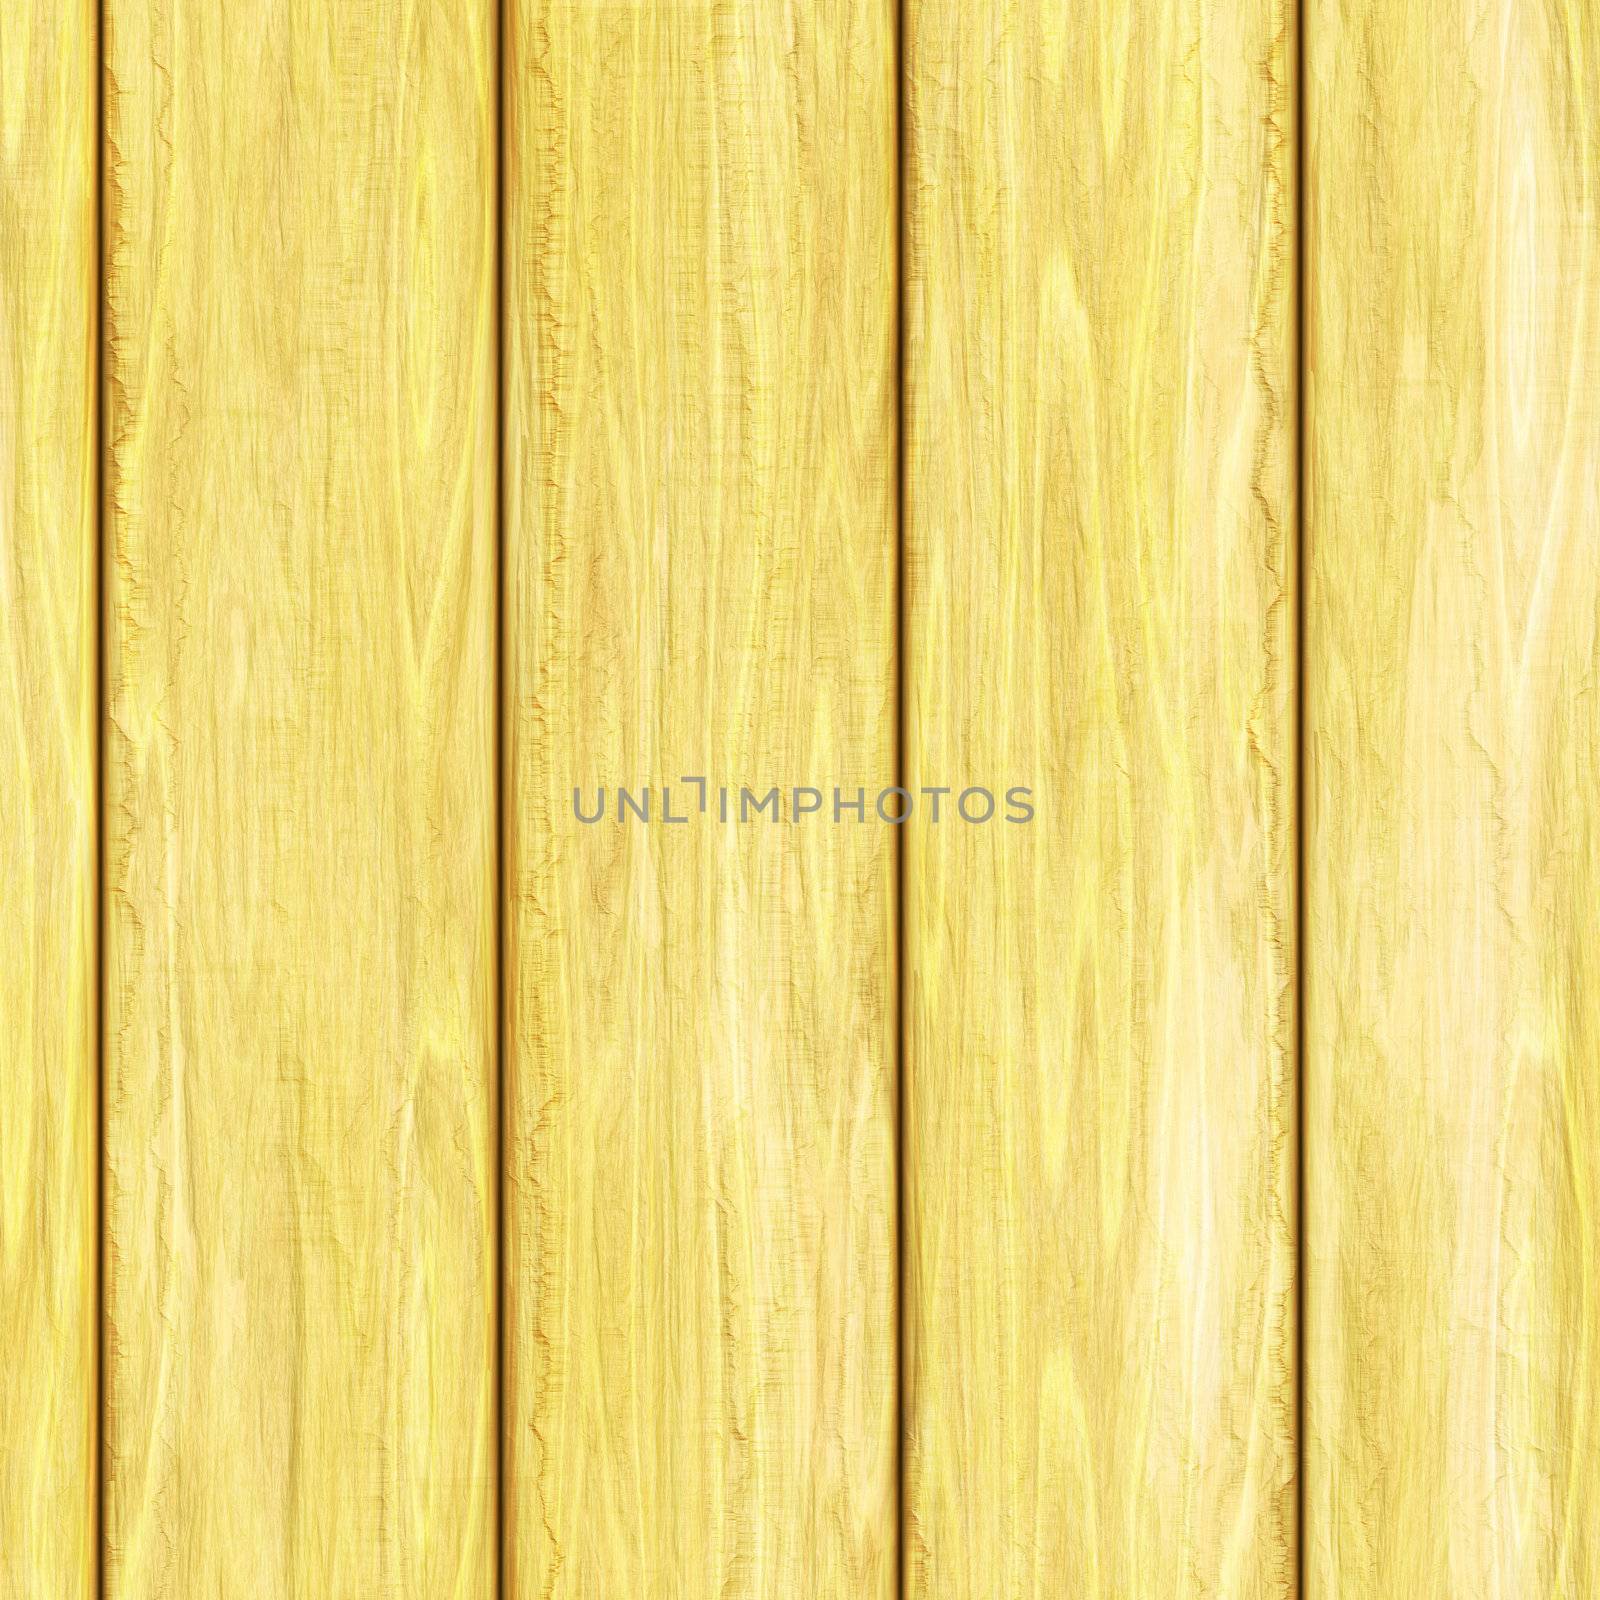 Wooden Boards Seamless Pattern by graficallyminded